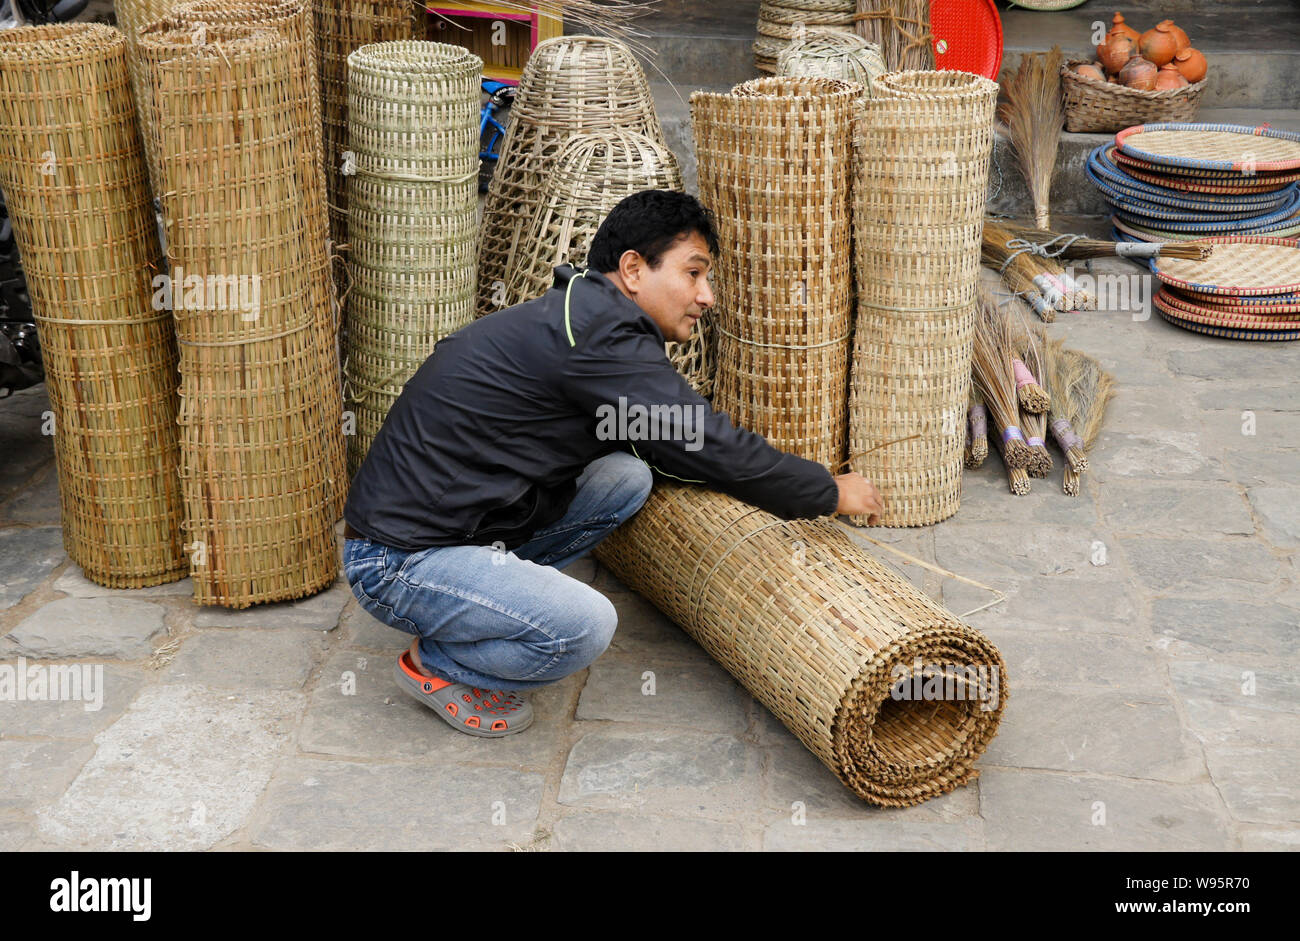 A man sells rattan products in the Old Bazaar area of Pokhara, Nepal Stock Photo